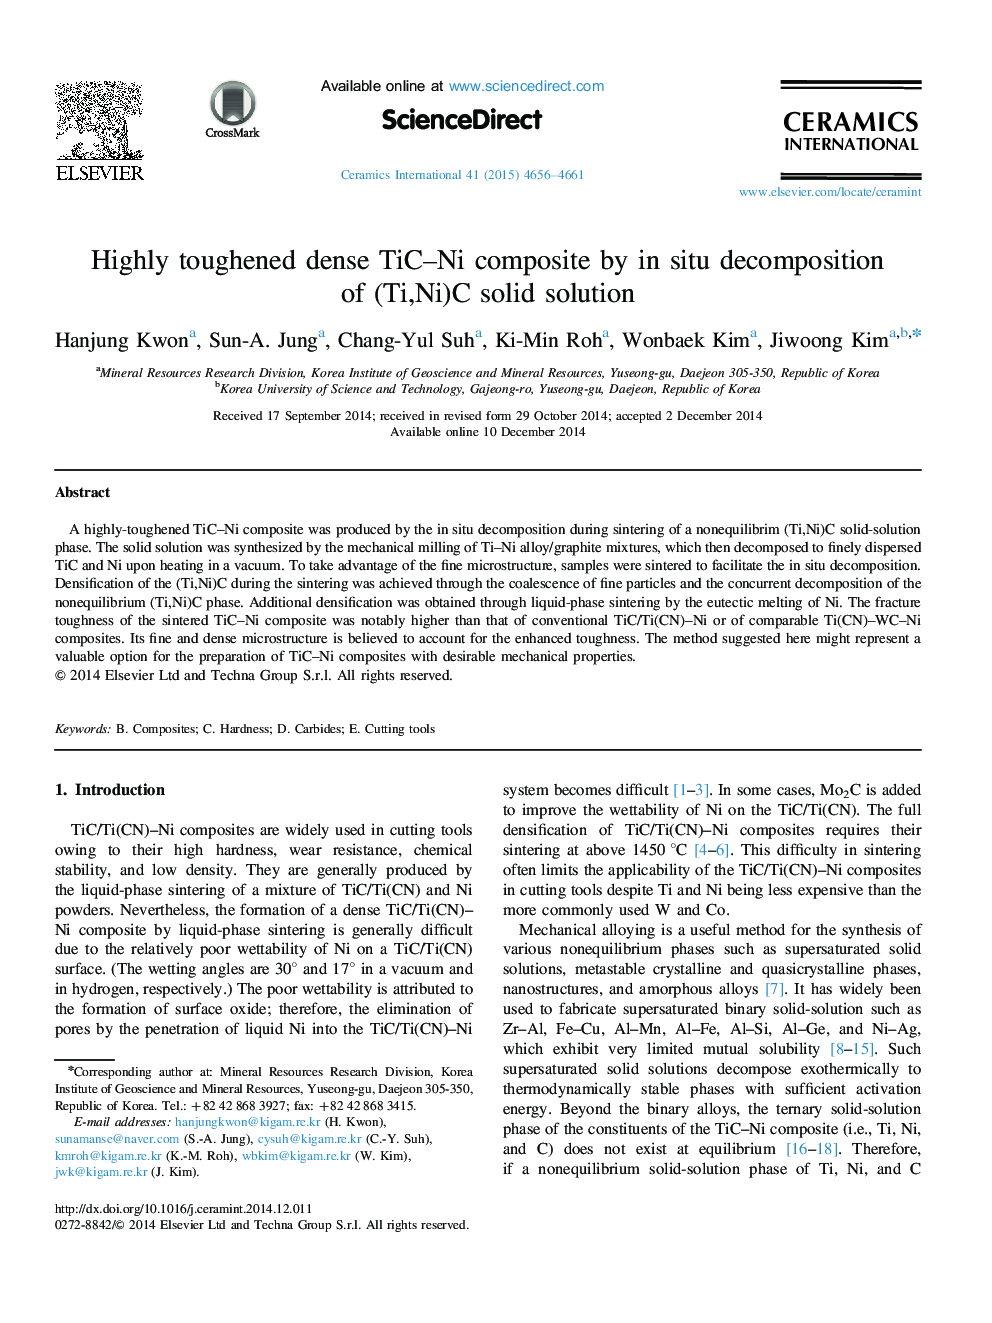 Highly toughened dense TiC-Ni composite by in situ decomposition of (Ti,Ni)C solid solution